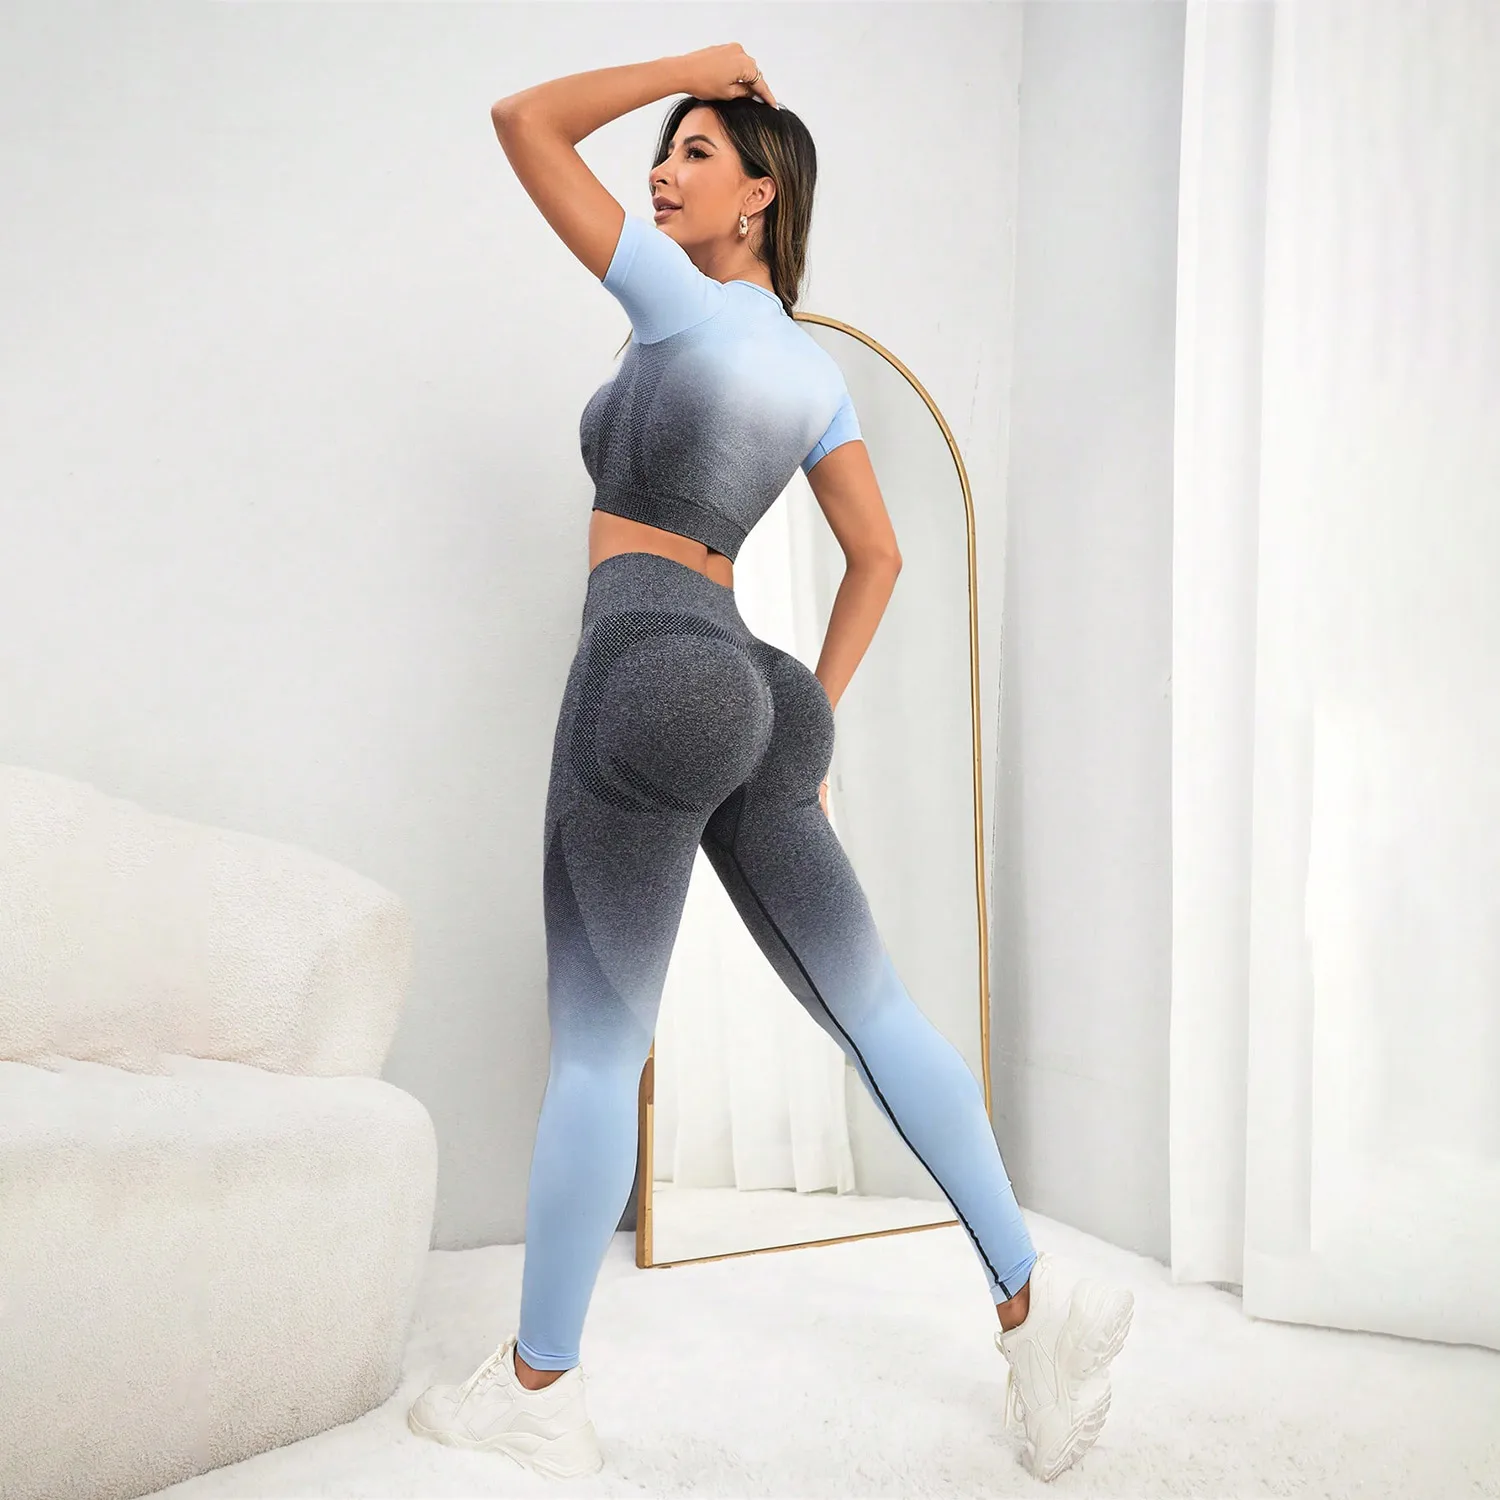 Hot Girls Seamless Tight Yoga Set New Design Contrast Color 2PCS Fitness Set Short Sleeve Top With Leggings Gym Suit